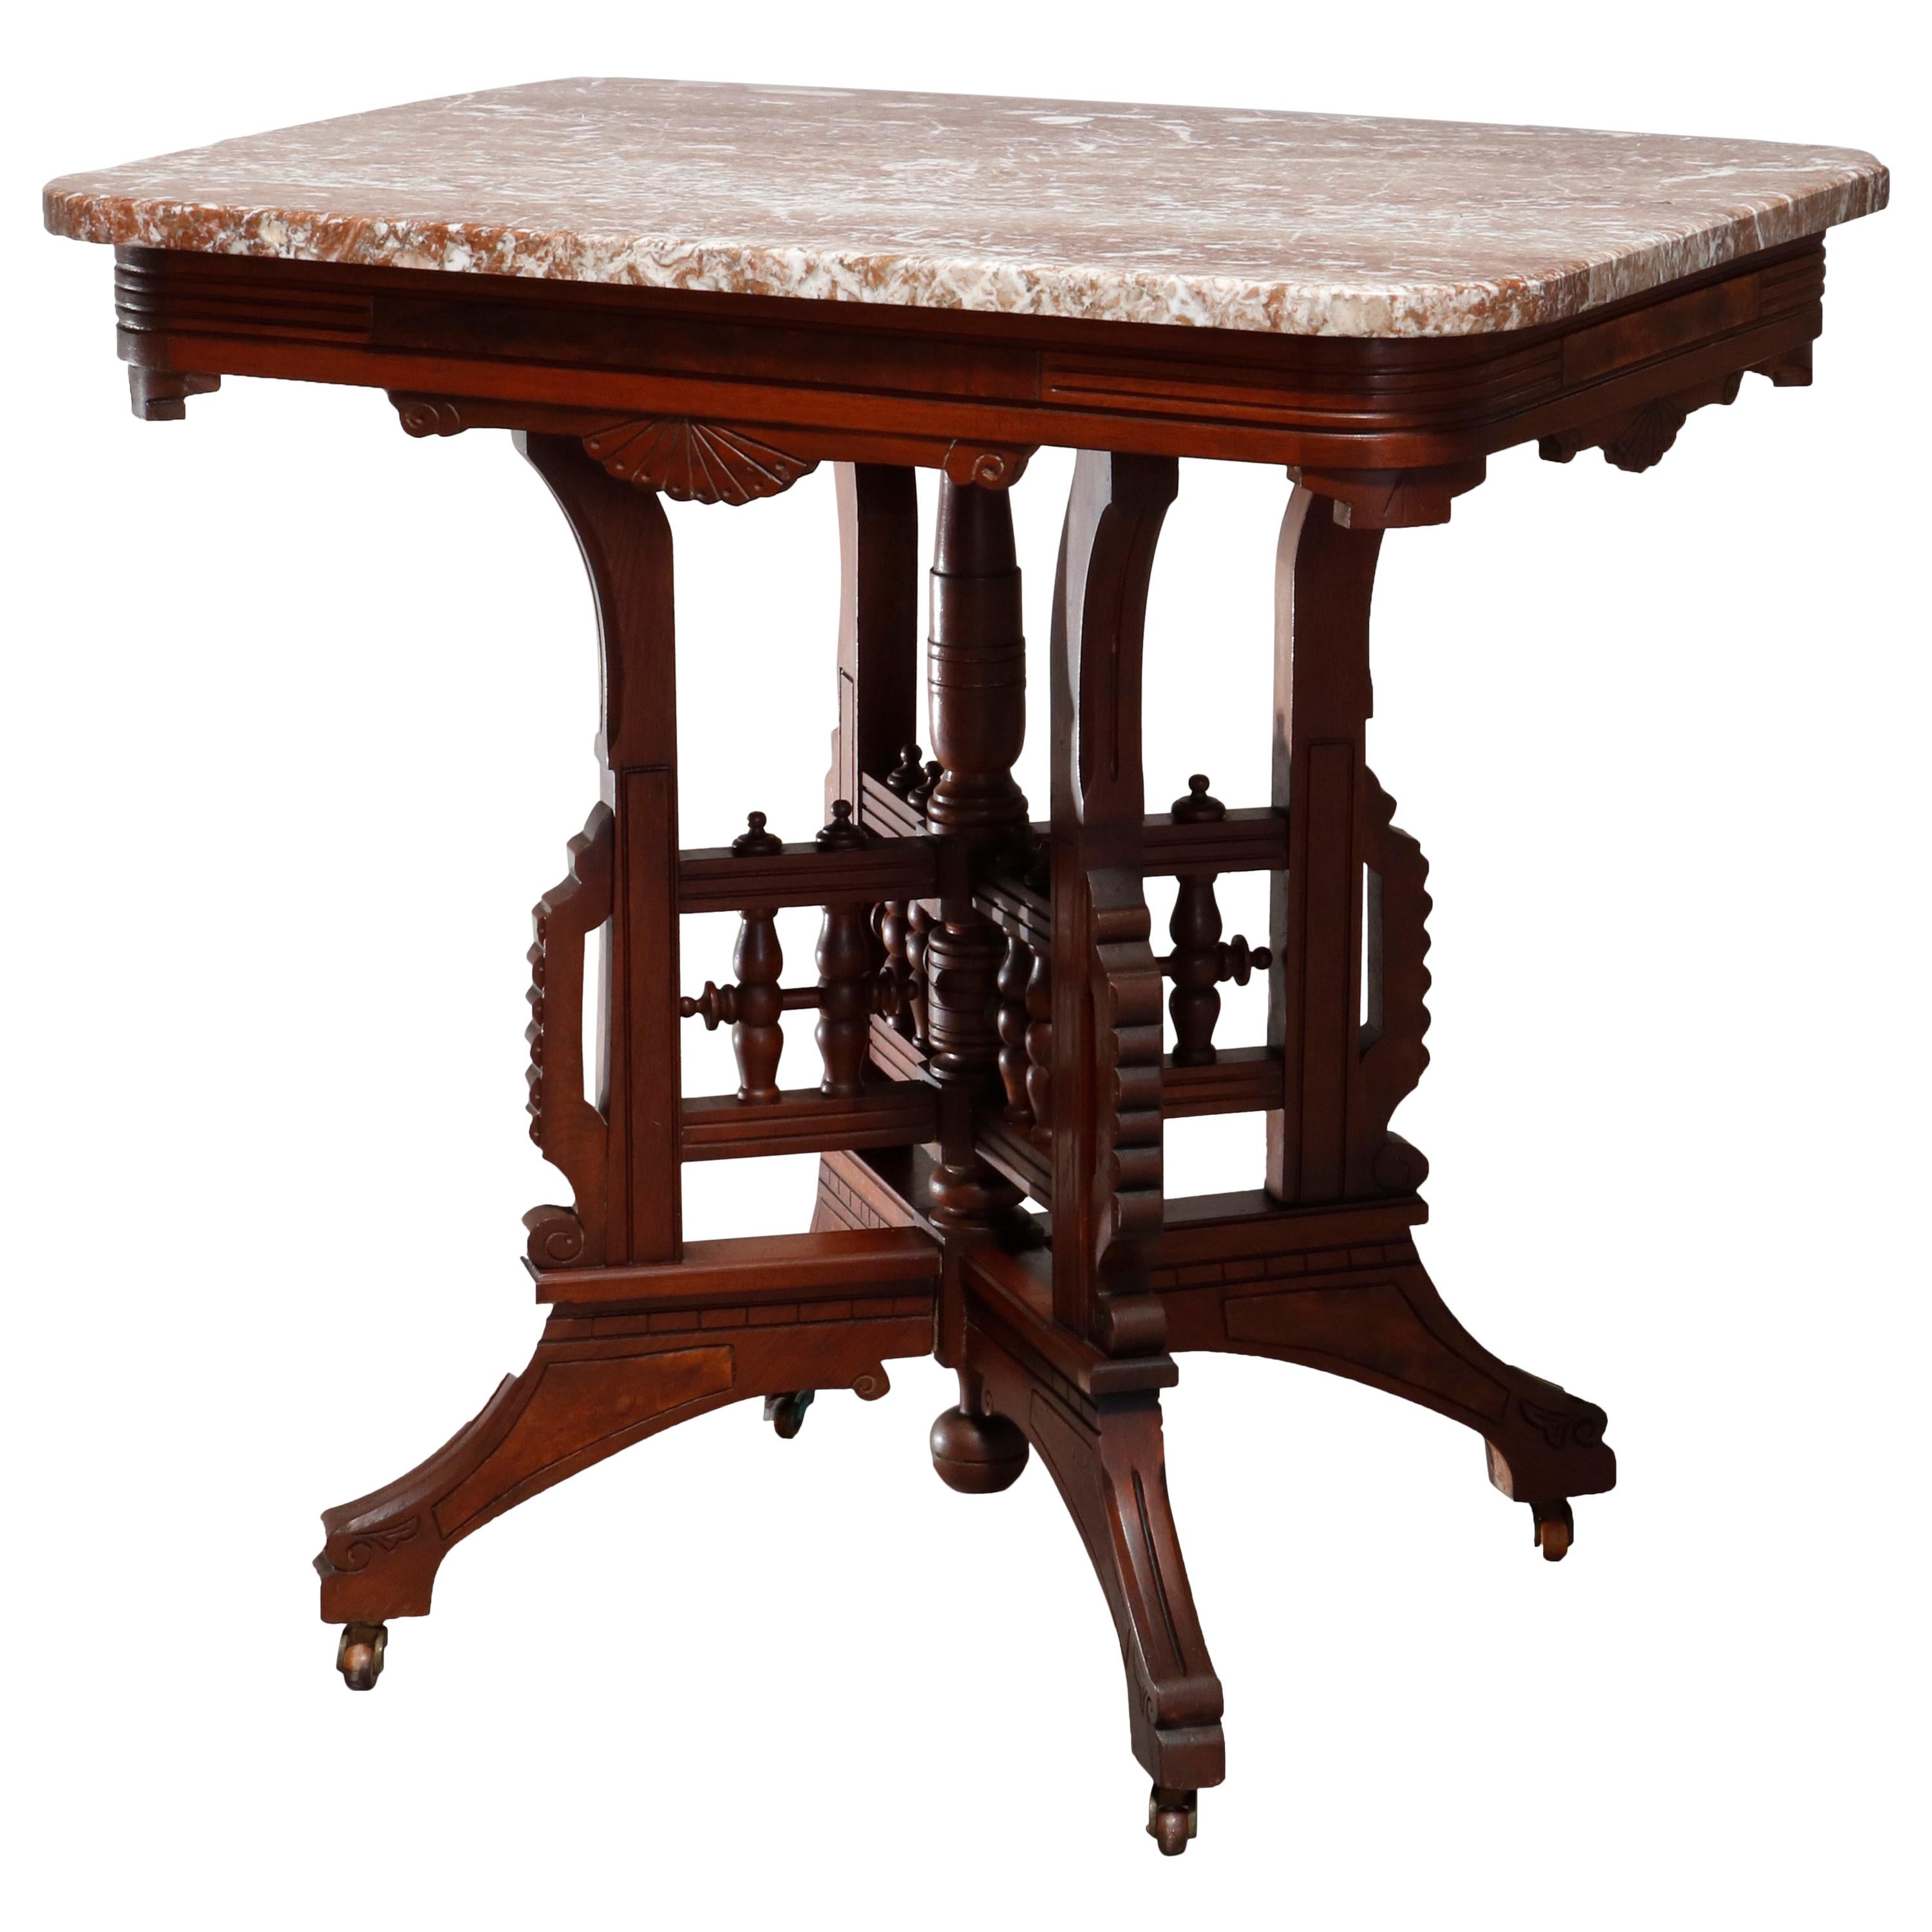 Antique Eastlake Carved Walnut Burl and Rouge Marble-Top Parlor Table circa 1890